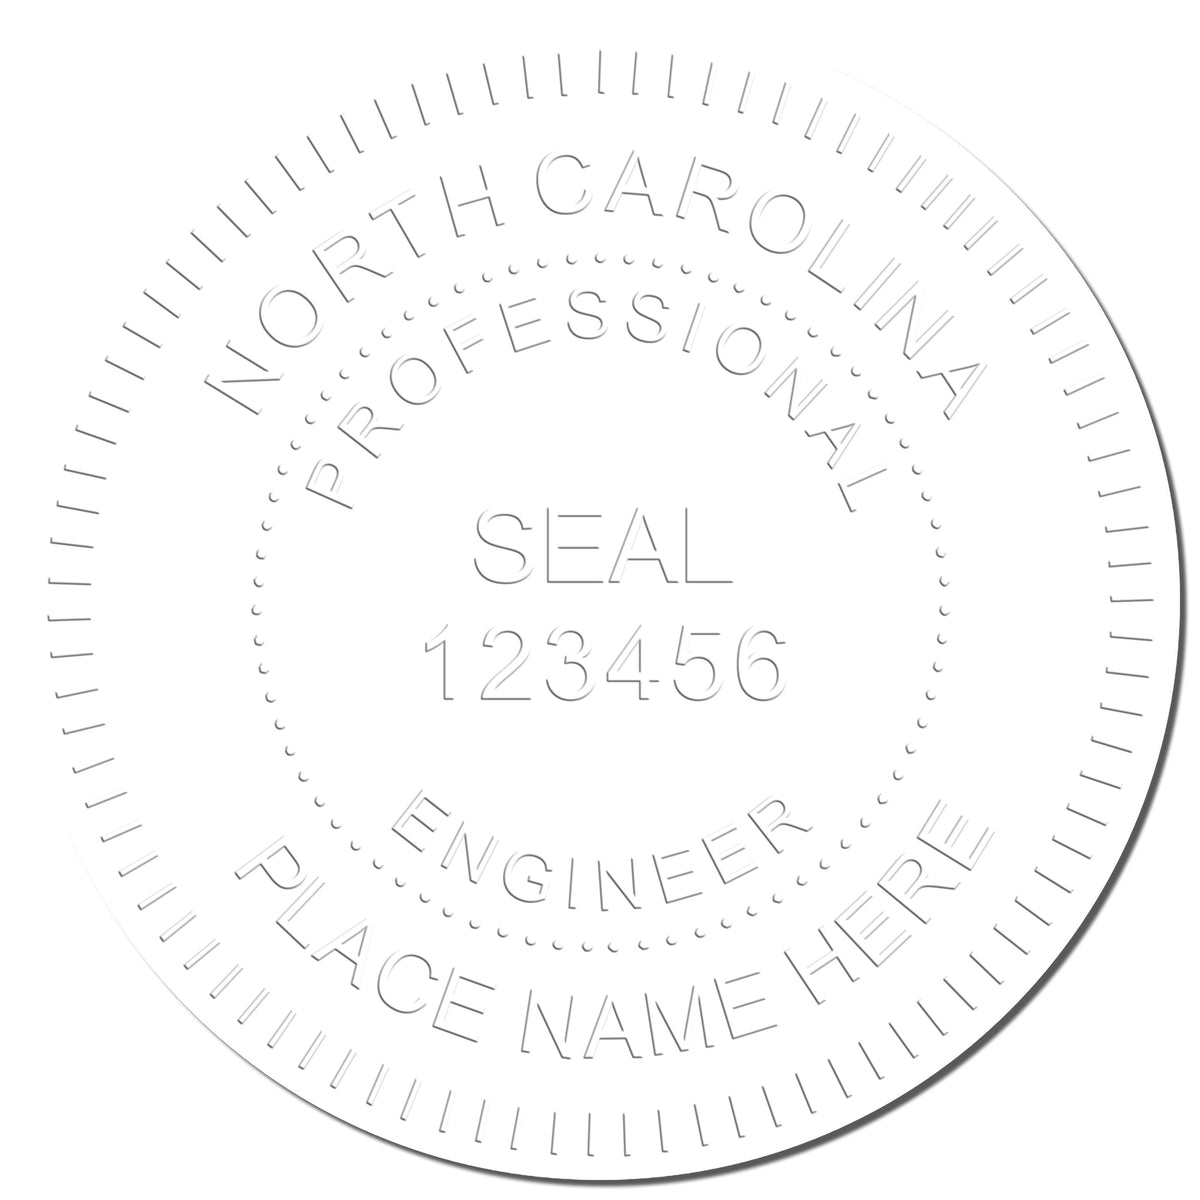 This paper is stamped with a sample imprint of the Hybrid North Carolina Engineer Seal, signifying its quality and reliability.